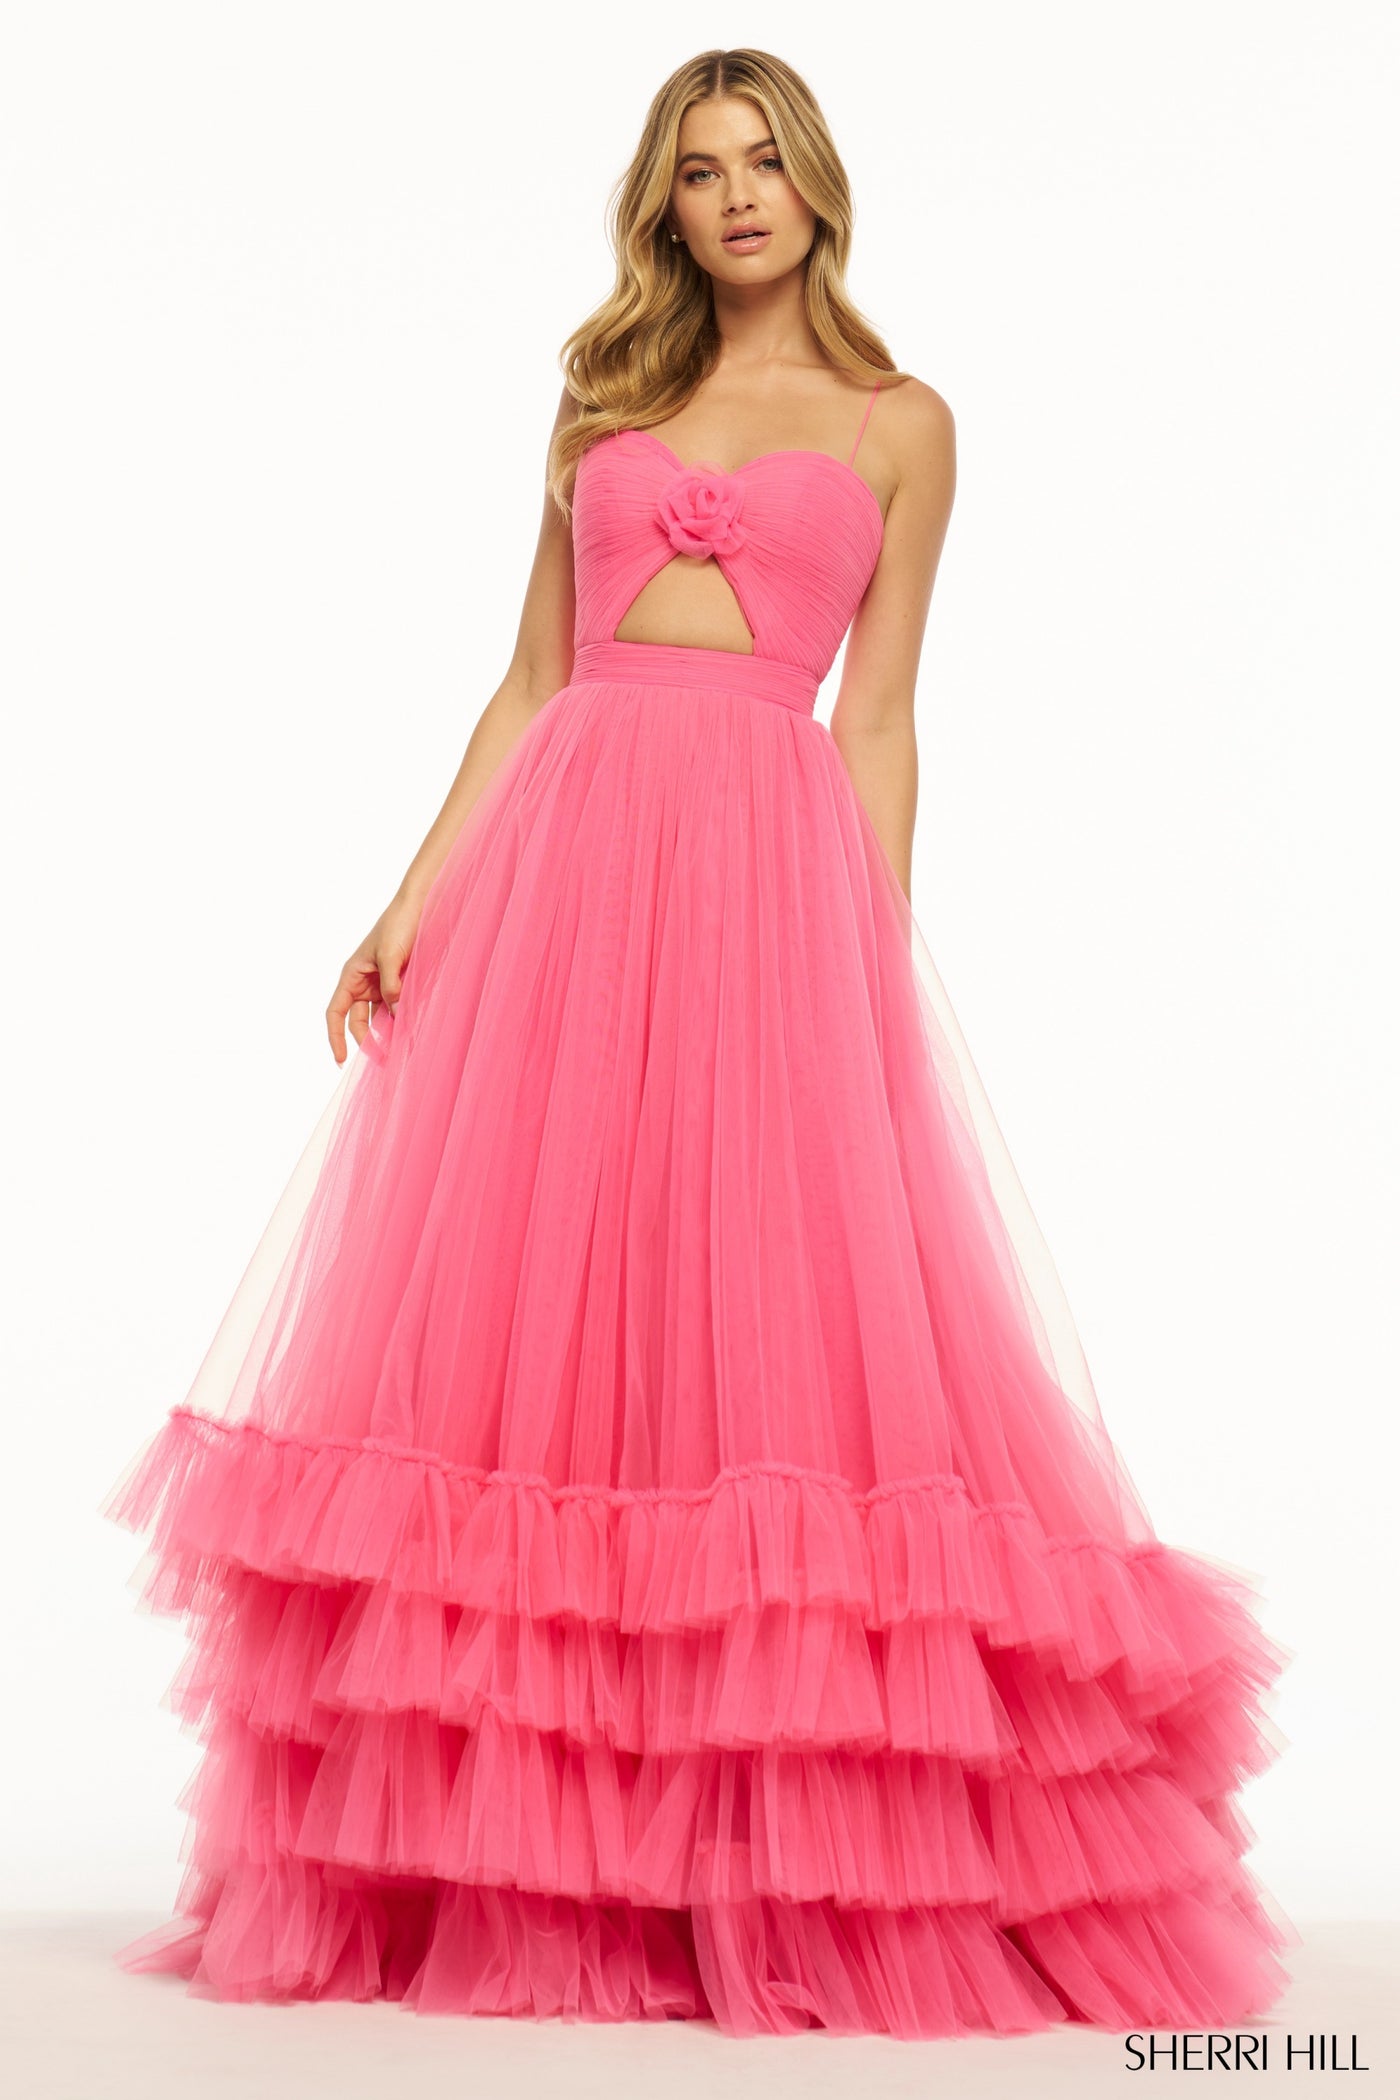 Sherri-Hill-55982-Sweetheart-Neckline-A-line-Gown-Tulle-Fabric-Candy-Pink-Long-Dress-Evening-Gown-Prom-Dress-Sherri-Hill-2024